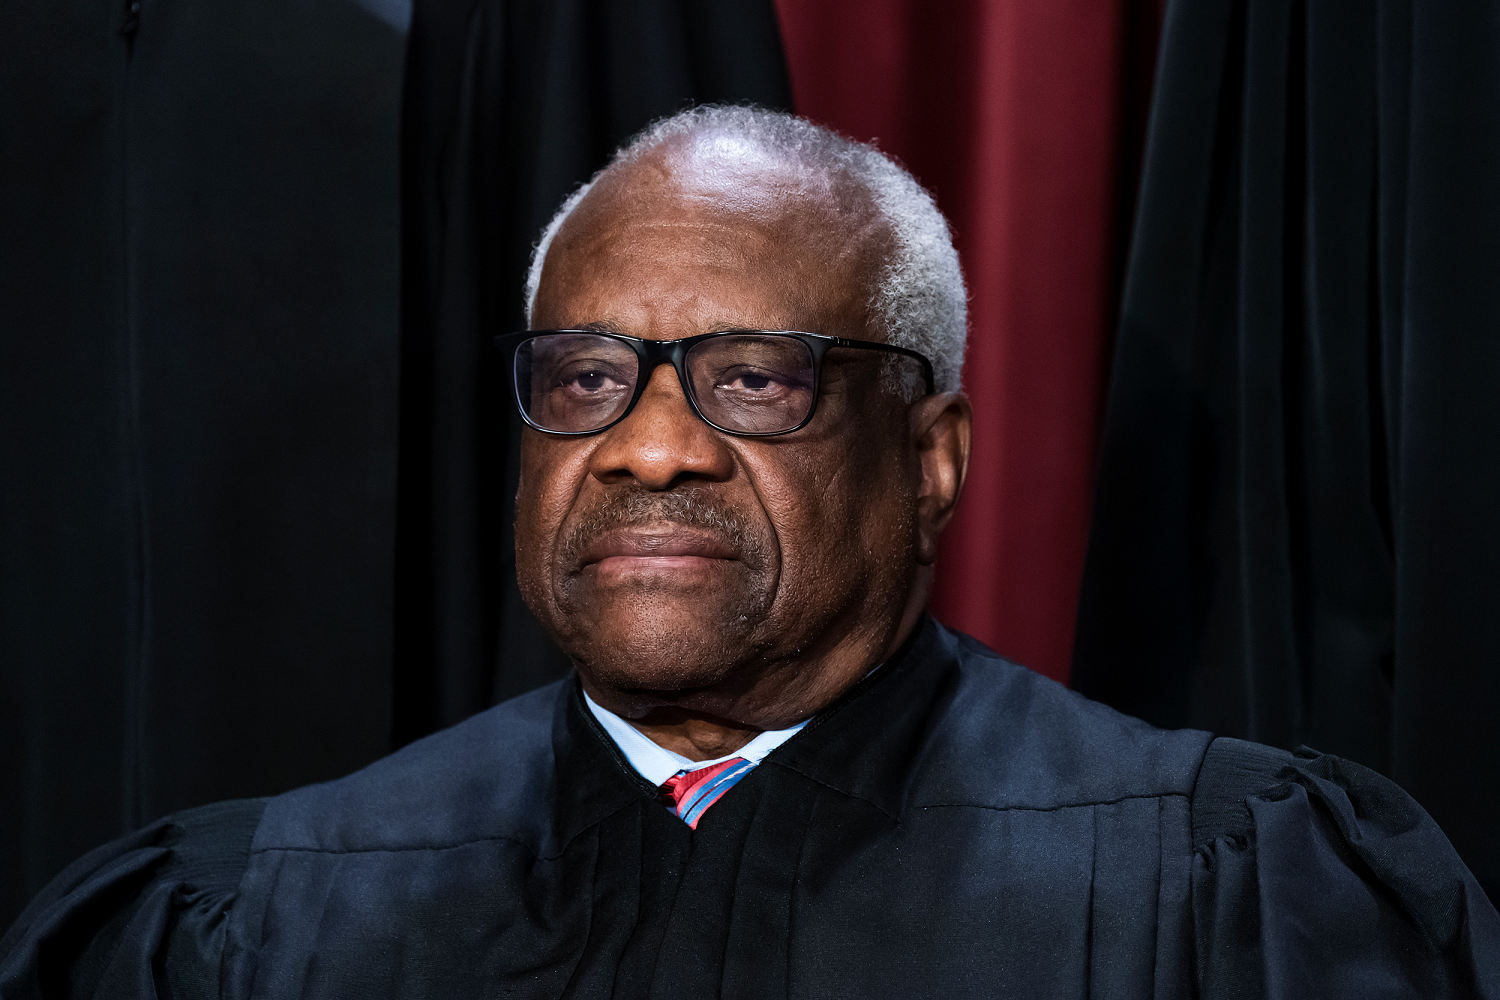 Justice Clarence Thomas didn't disclose additional private jet travel, Democratic senator says